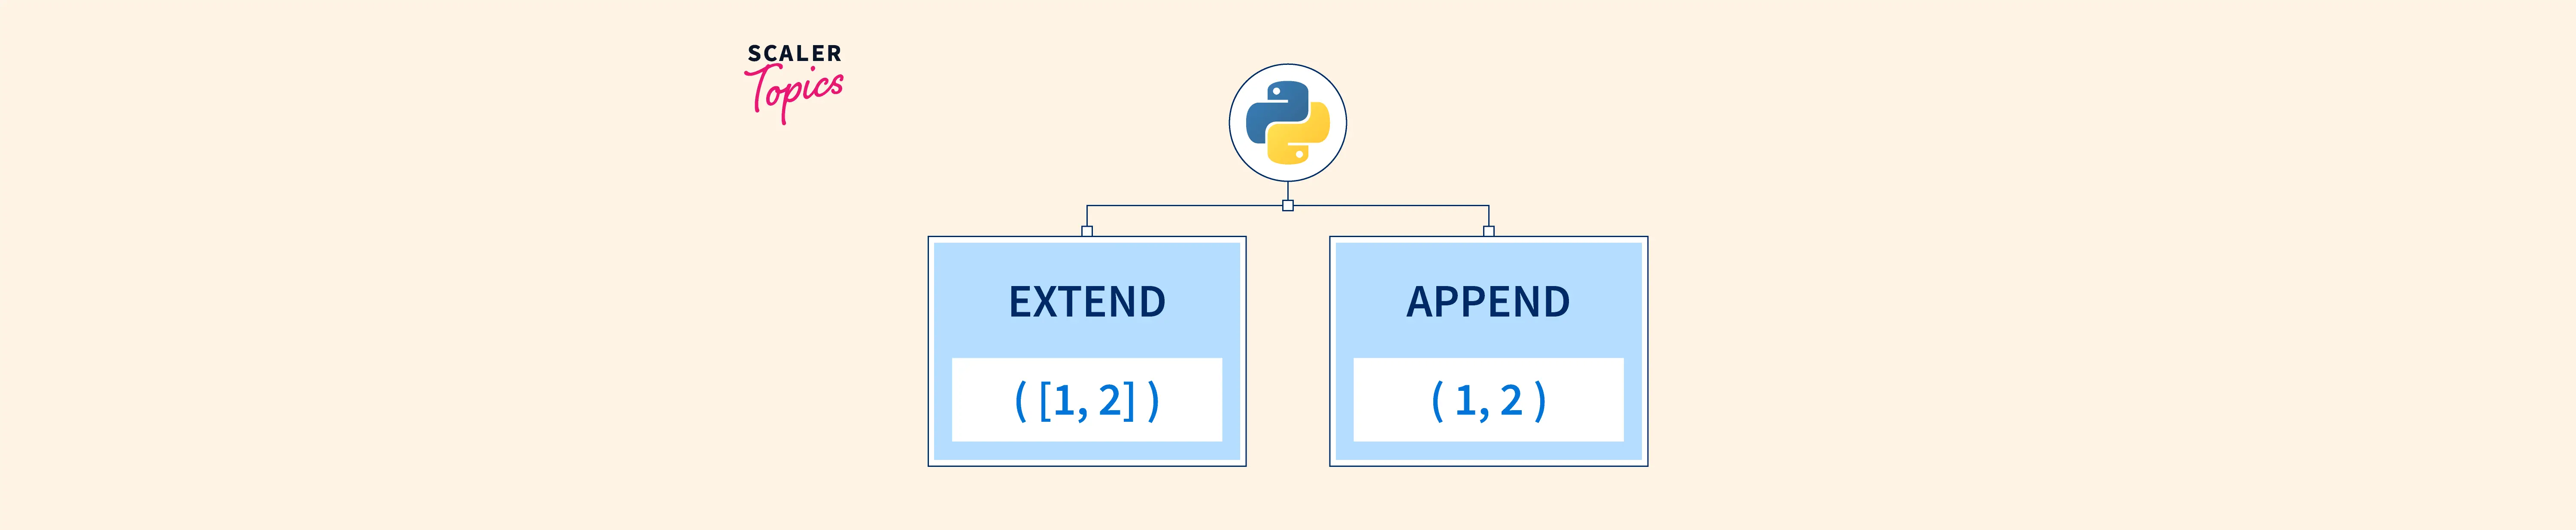 What is the difference between Python's list methods append and